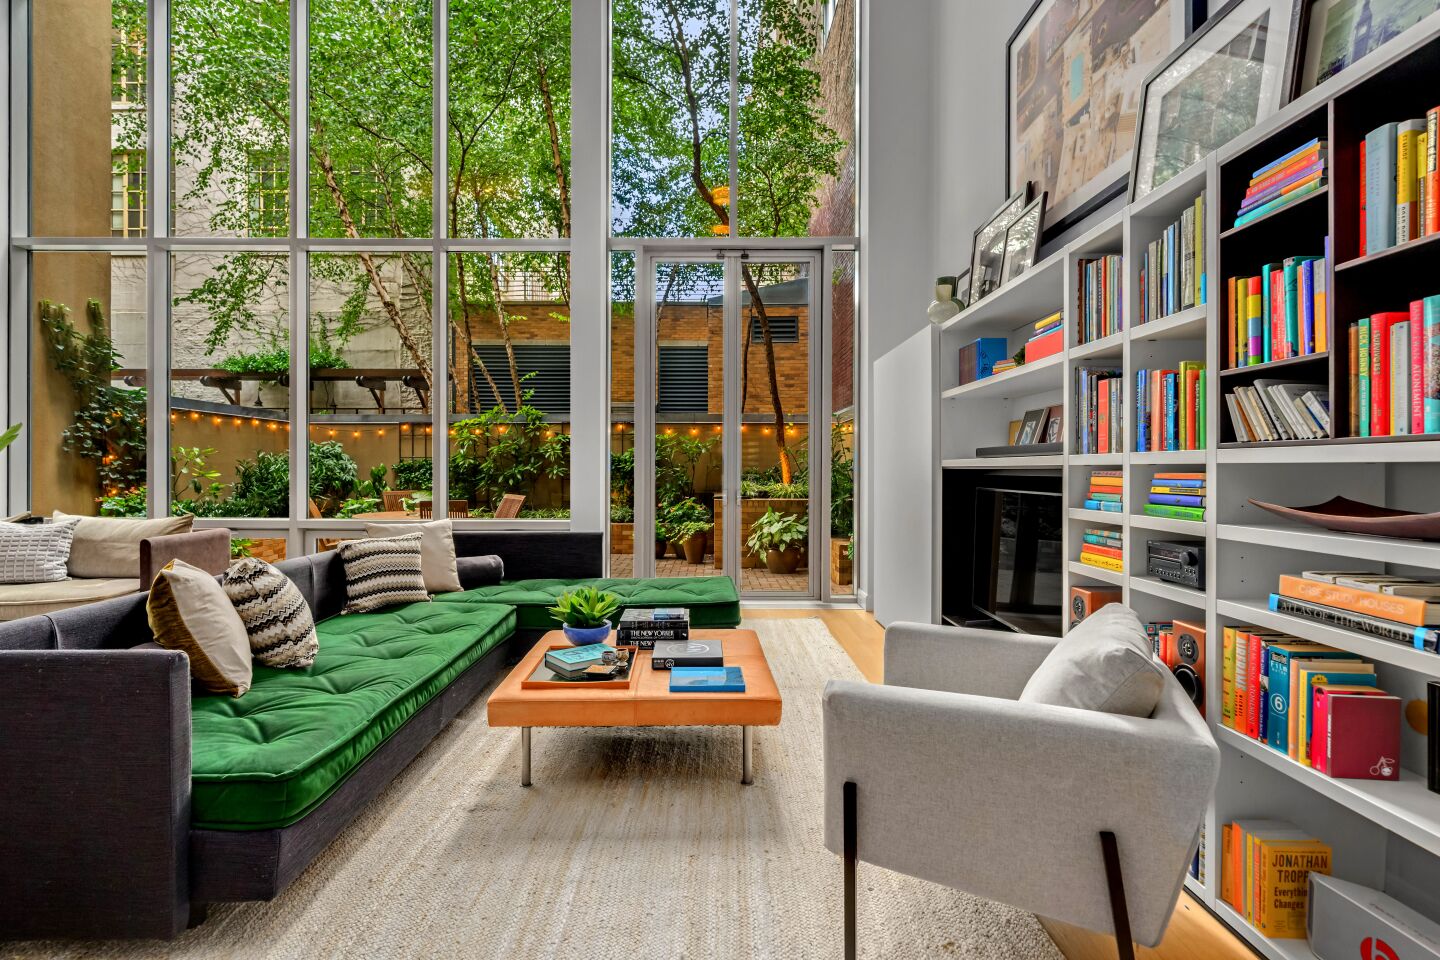 Michael Davies, producer of such shows as "Comedians in Cars Getting Coffee," is seeking $14.995 million for his three-story townhouse in Tribeca.